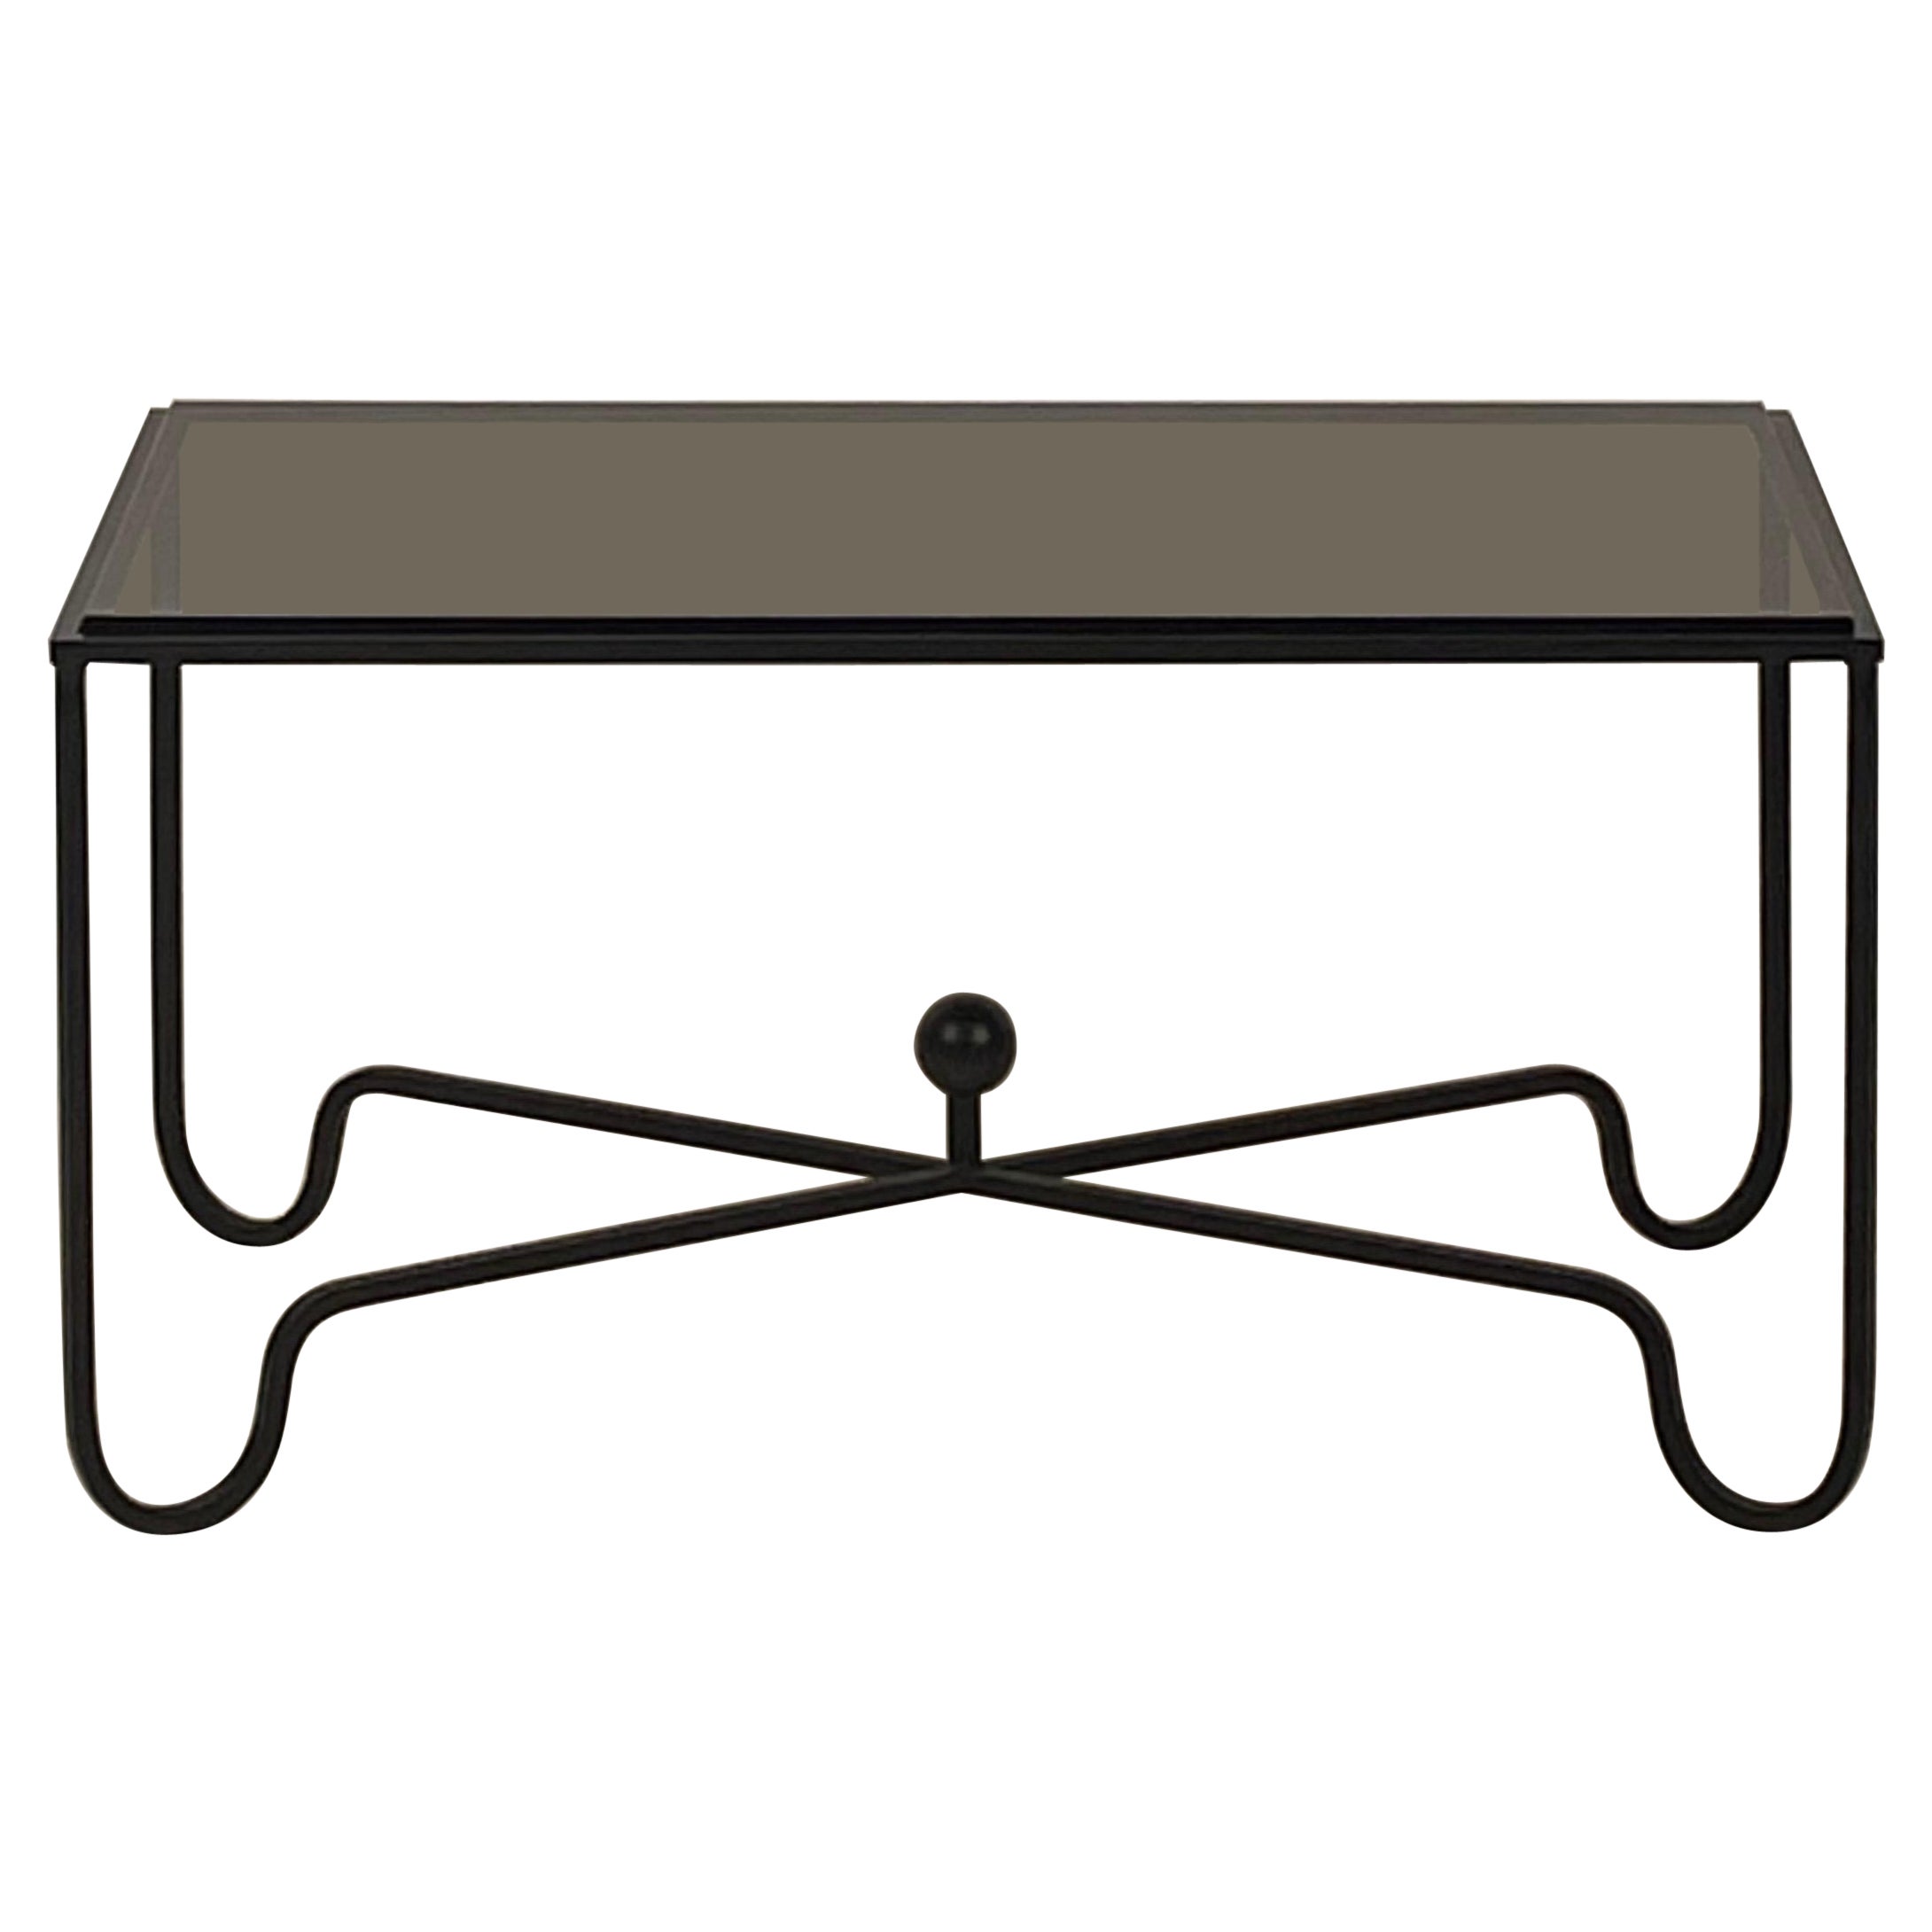 Blackened Iron and Smoked Glass 'Entretoise' Coffee Table by Design Frères For Sale